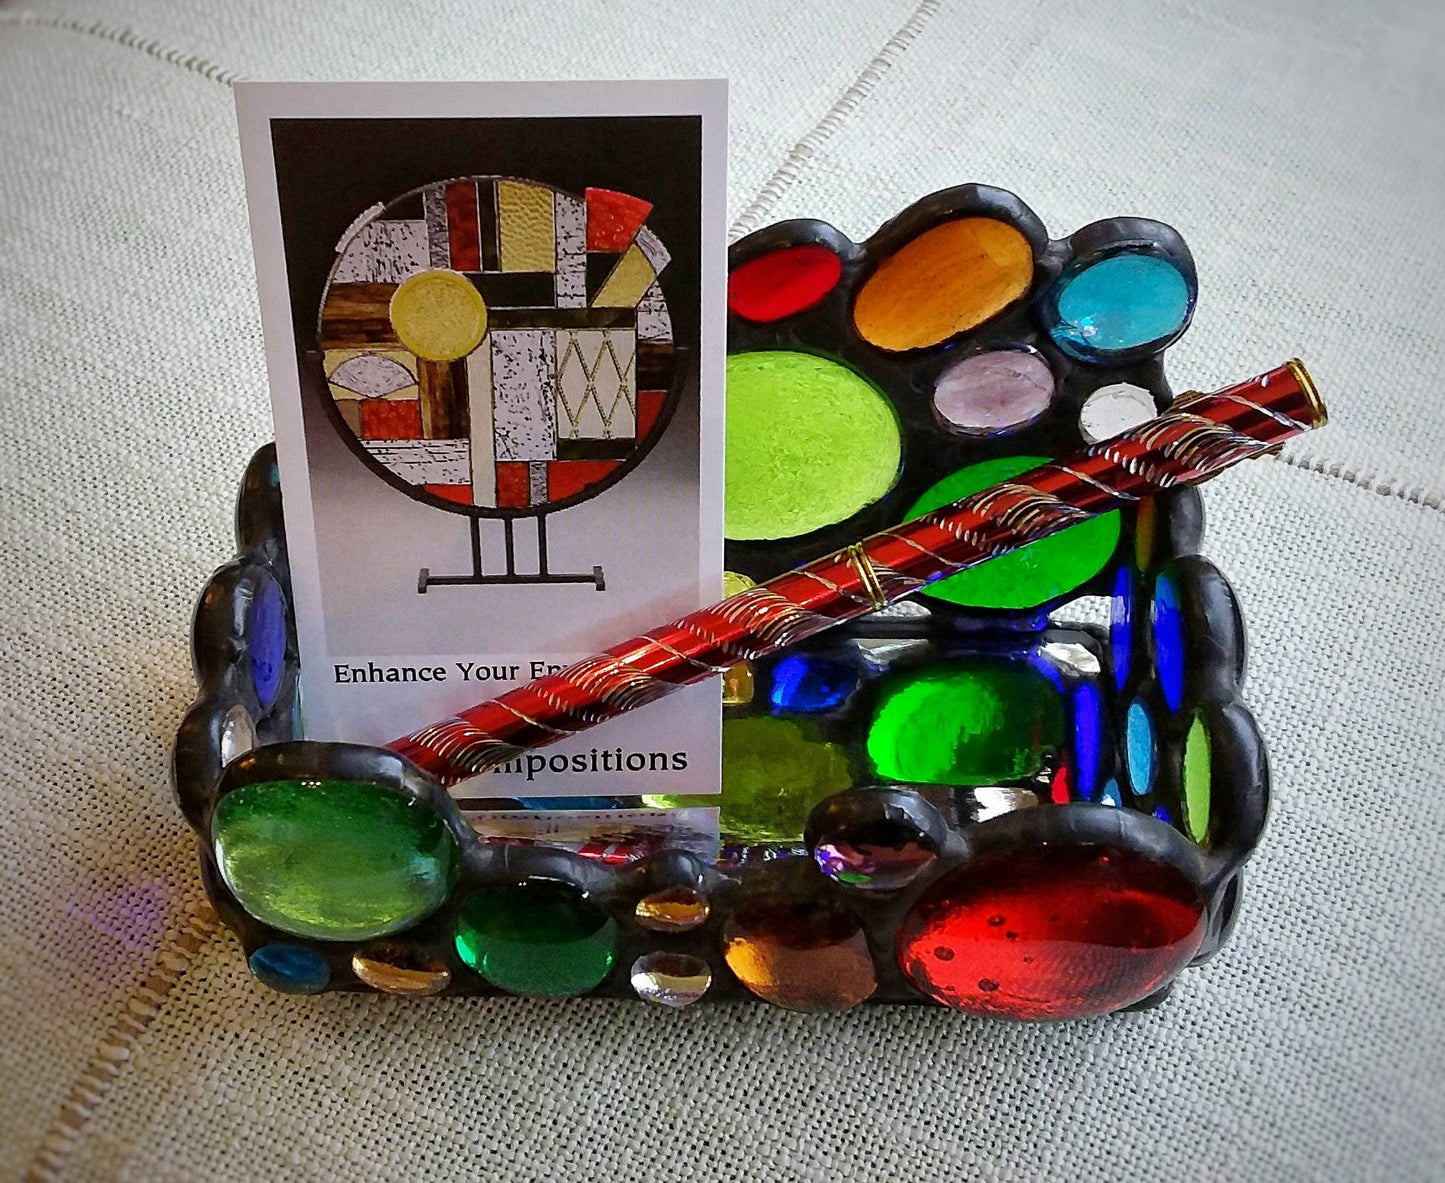 Business Card Holder for Desk. Stained Glass Gems sparkle on mirrored base. Secretary gift, home office decor. Stow notes & pens on counter.